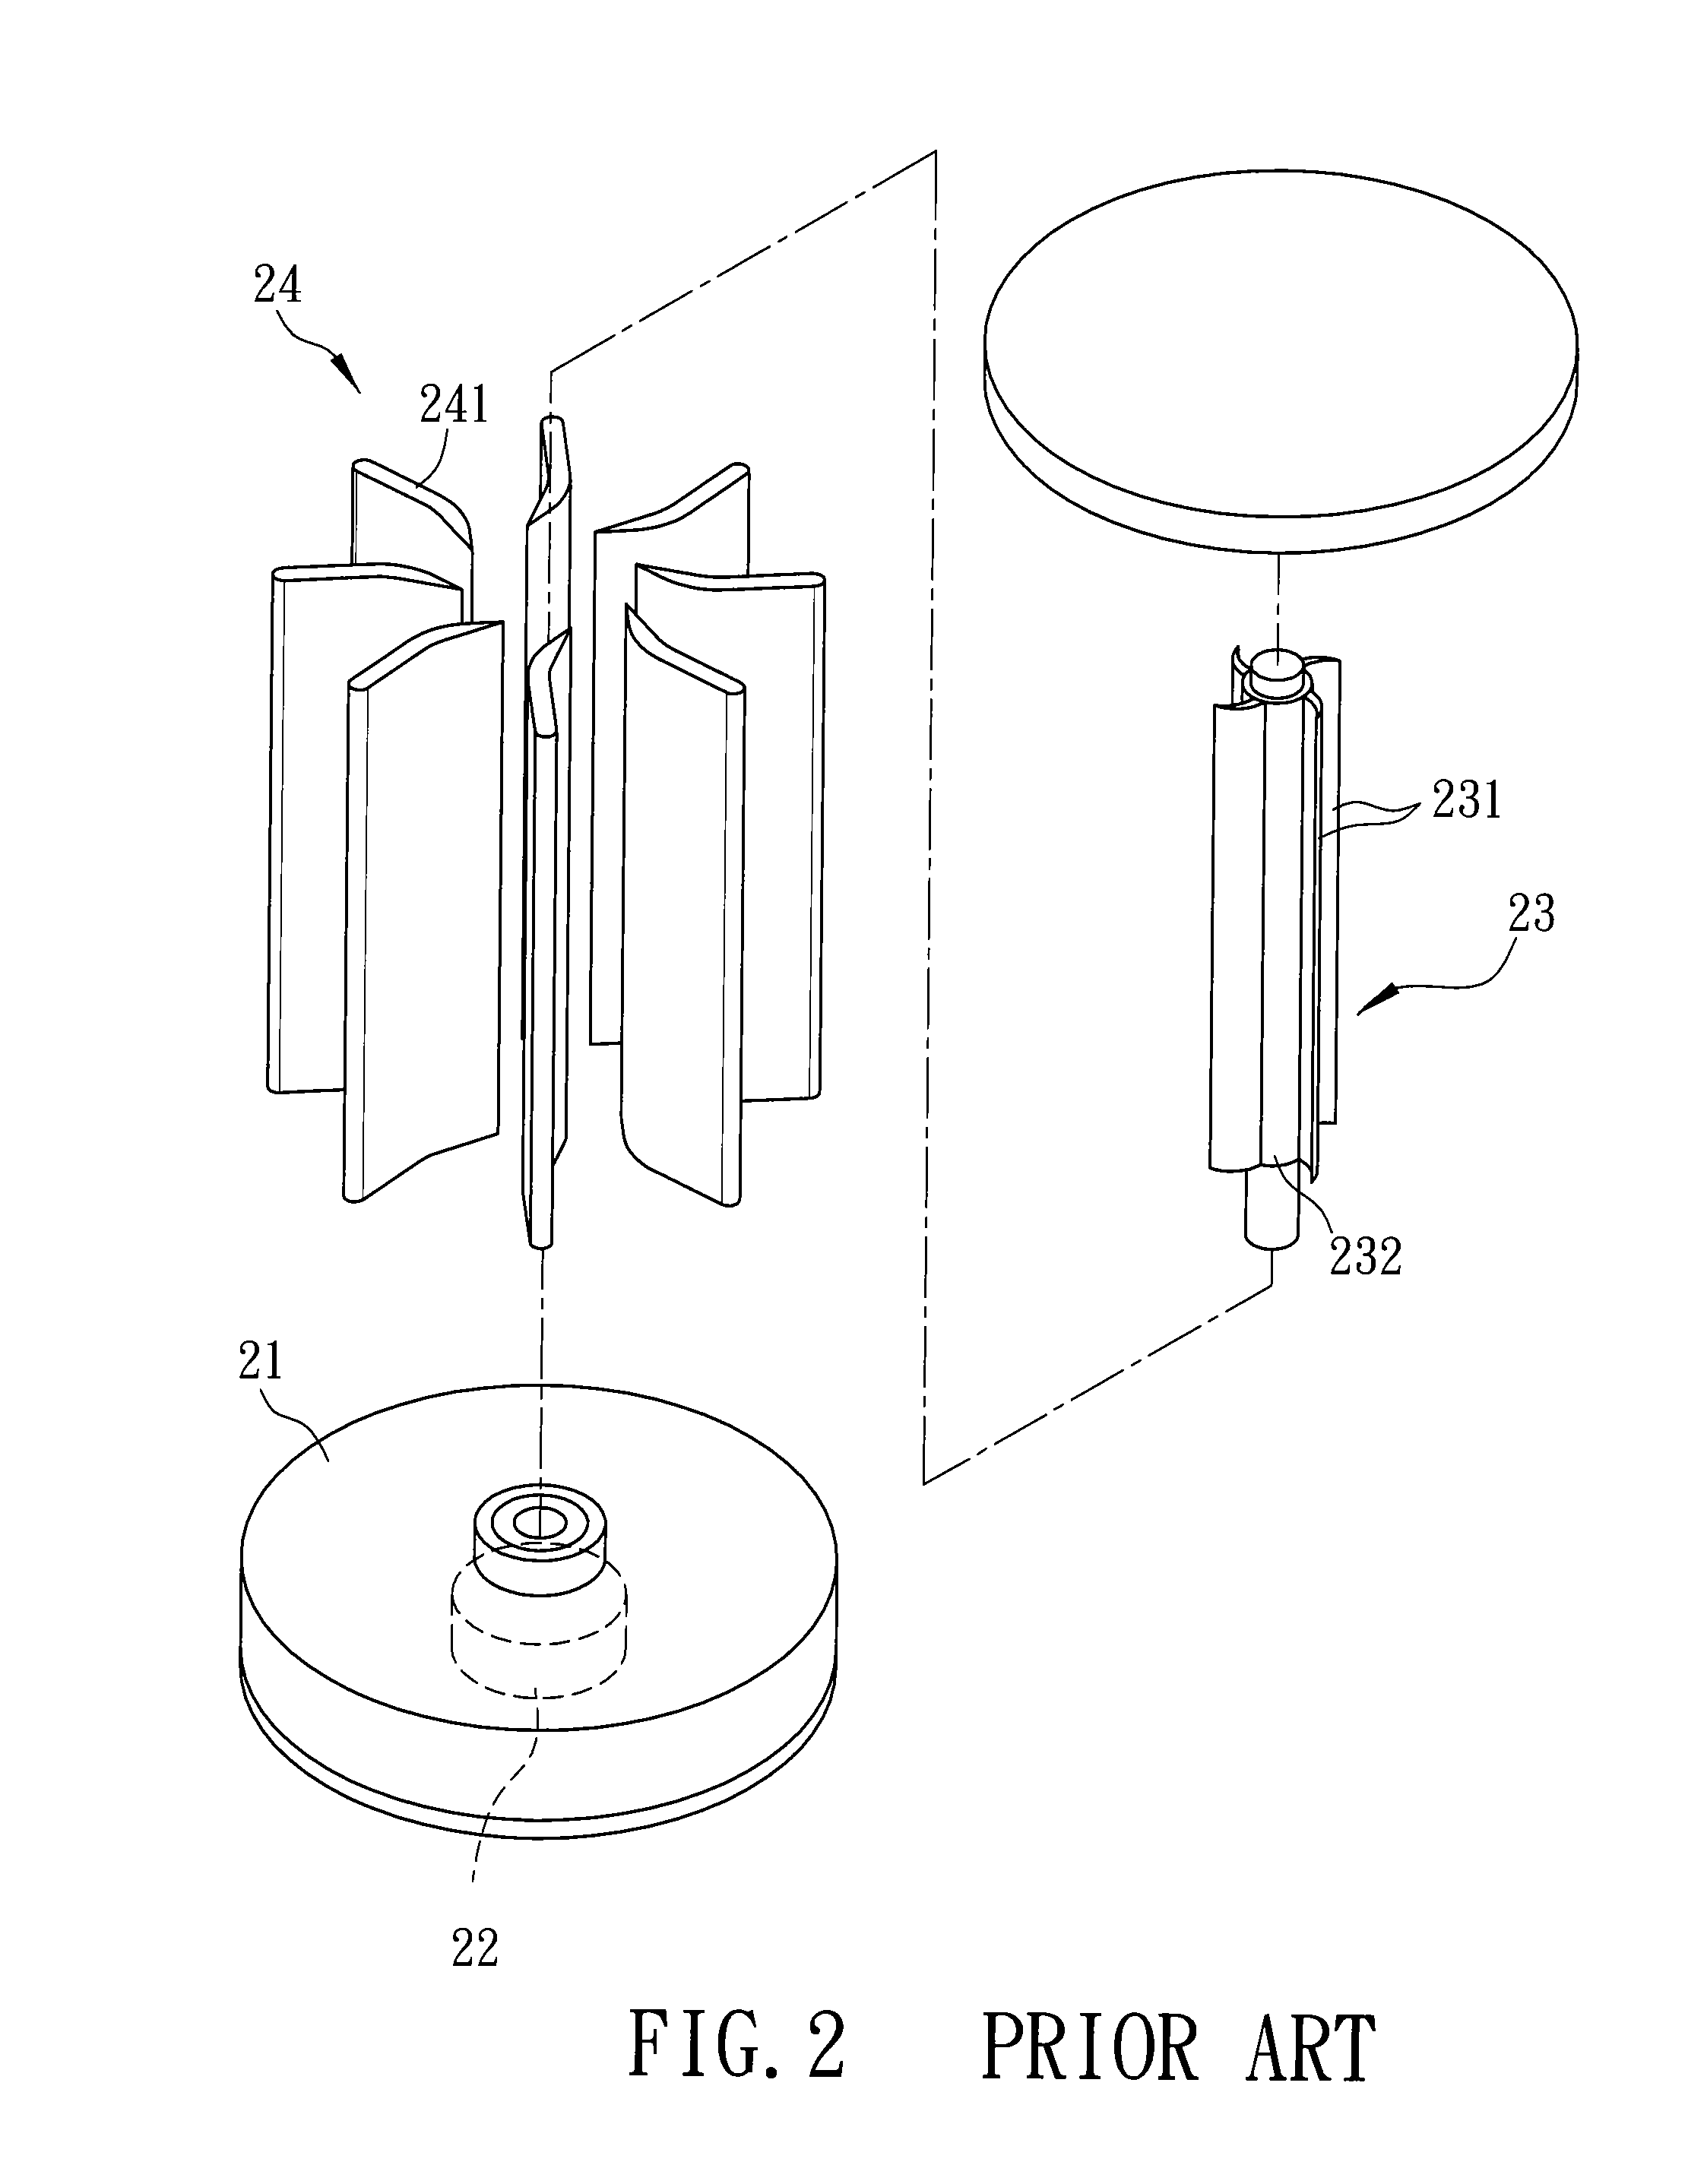 Apparatus for generating electric power using wind energy